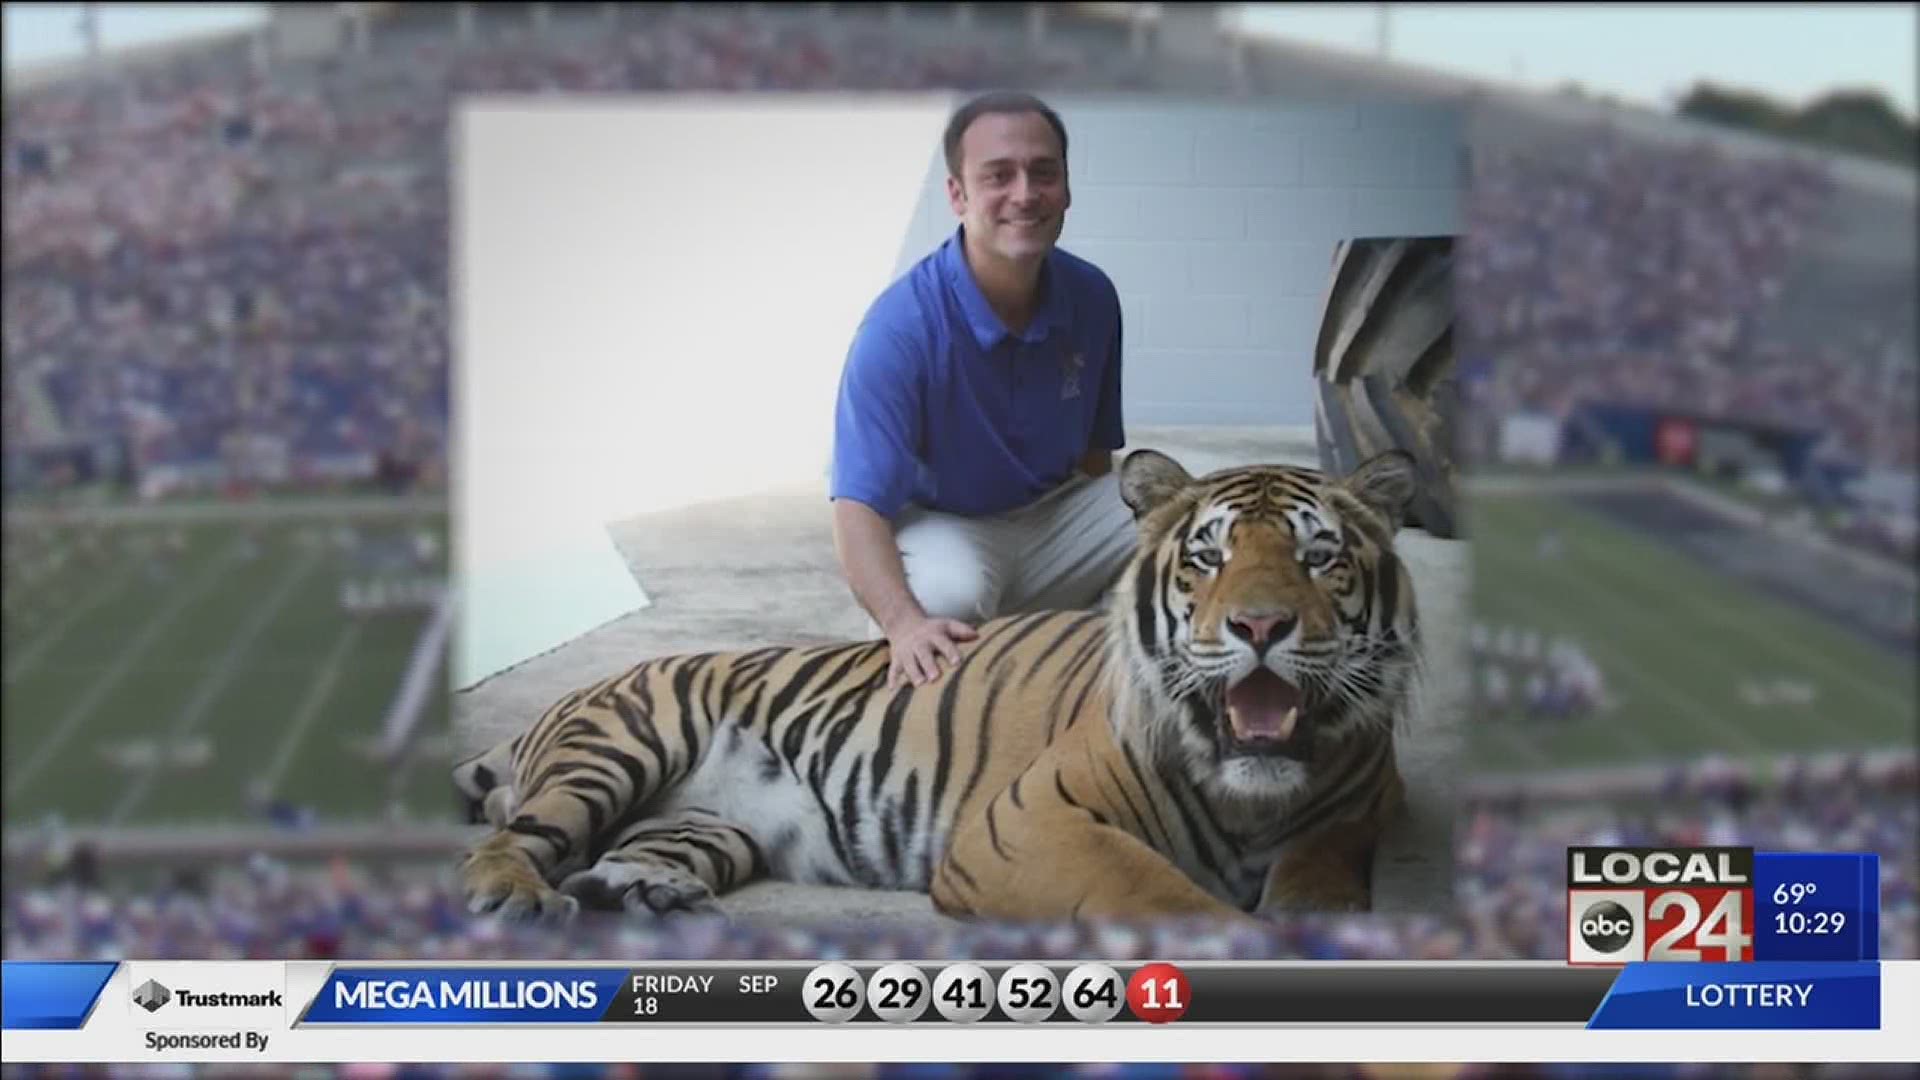 The beloved tiger mascot passed away Friday less than three weeks after his 12th birthday.